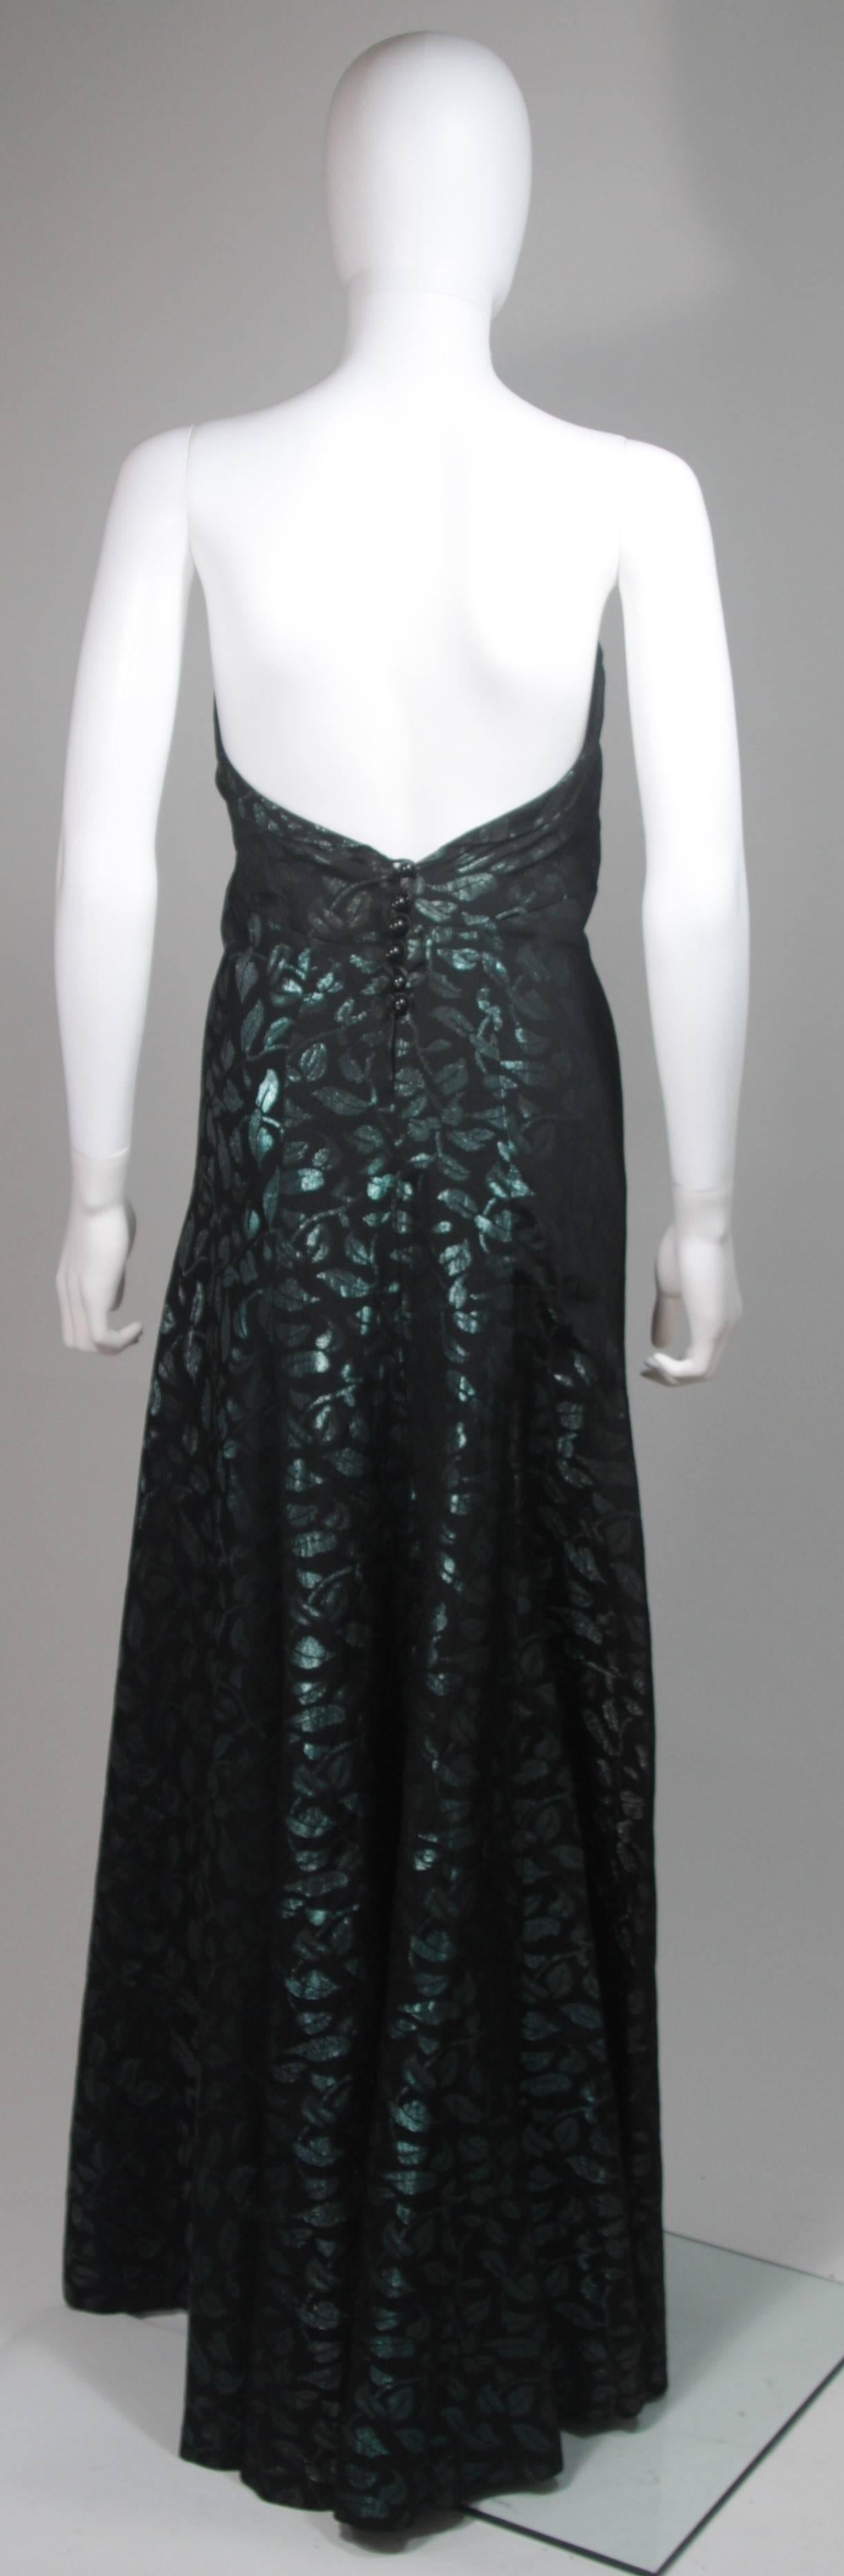 Women's Vintage 1950s Black Evening Gown with Iridescent Green & Blue Leaf Pattern For Sale